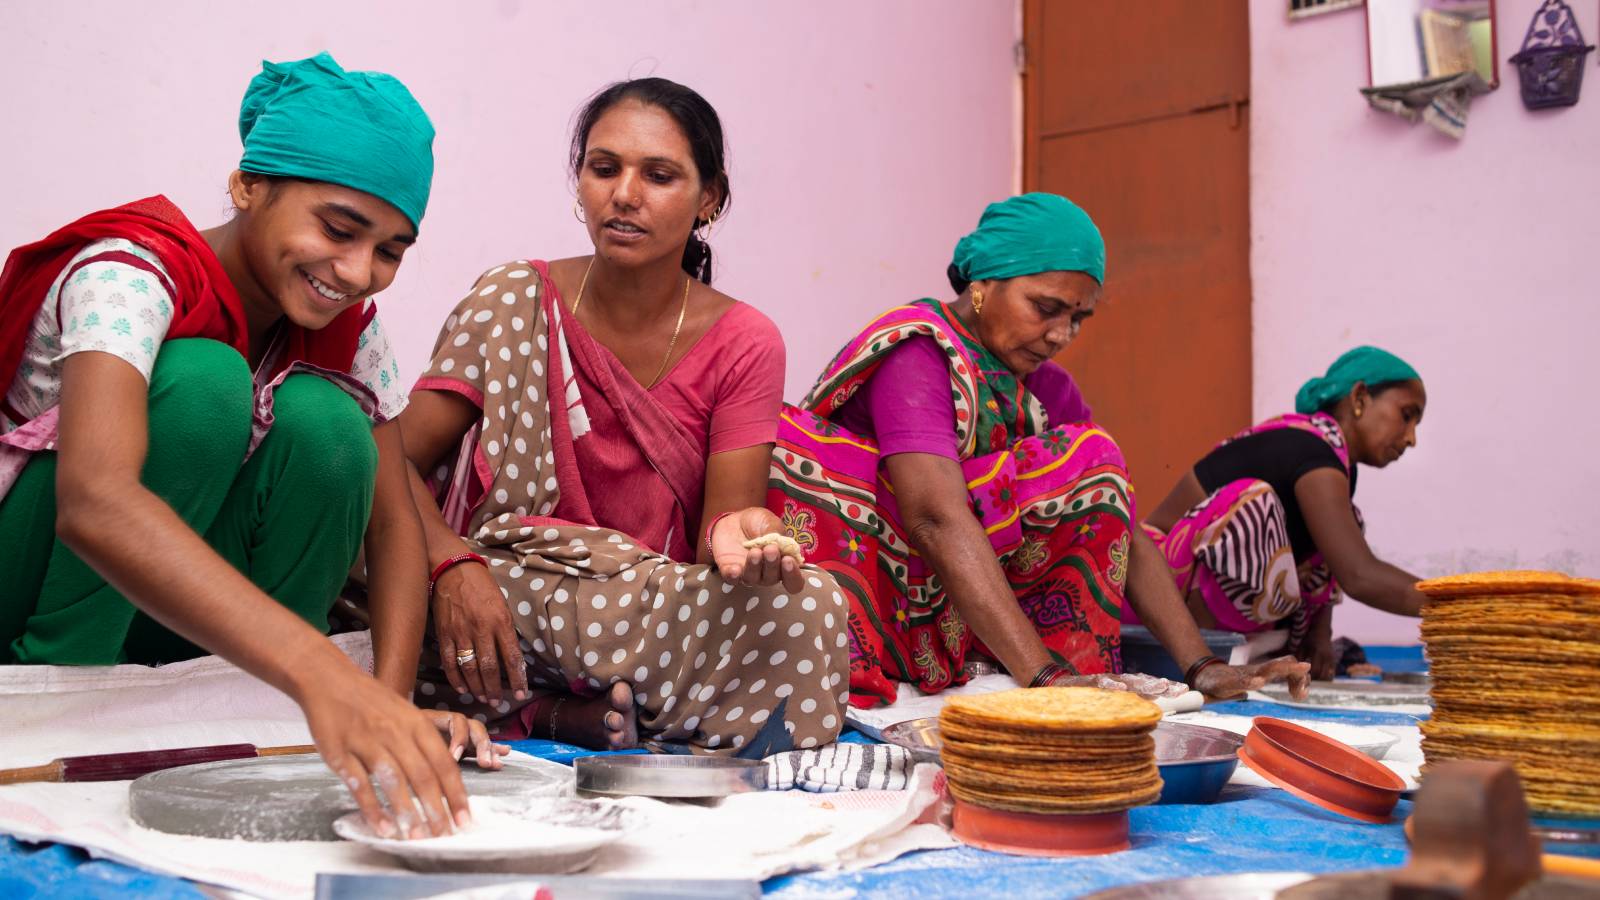 Four women in India making food together